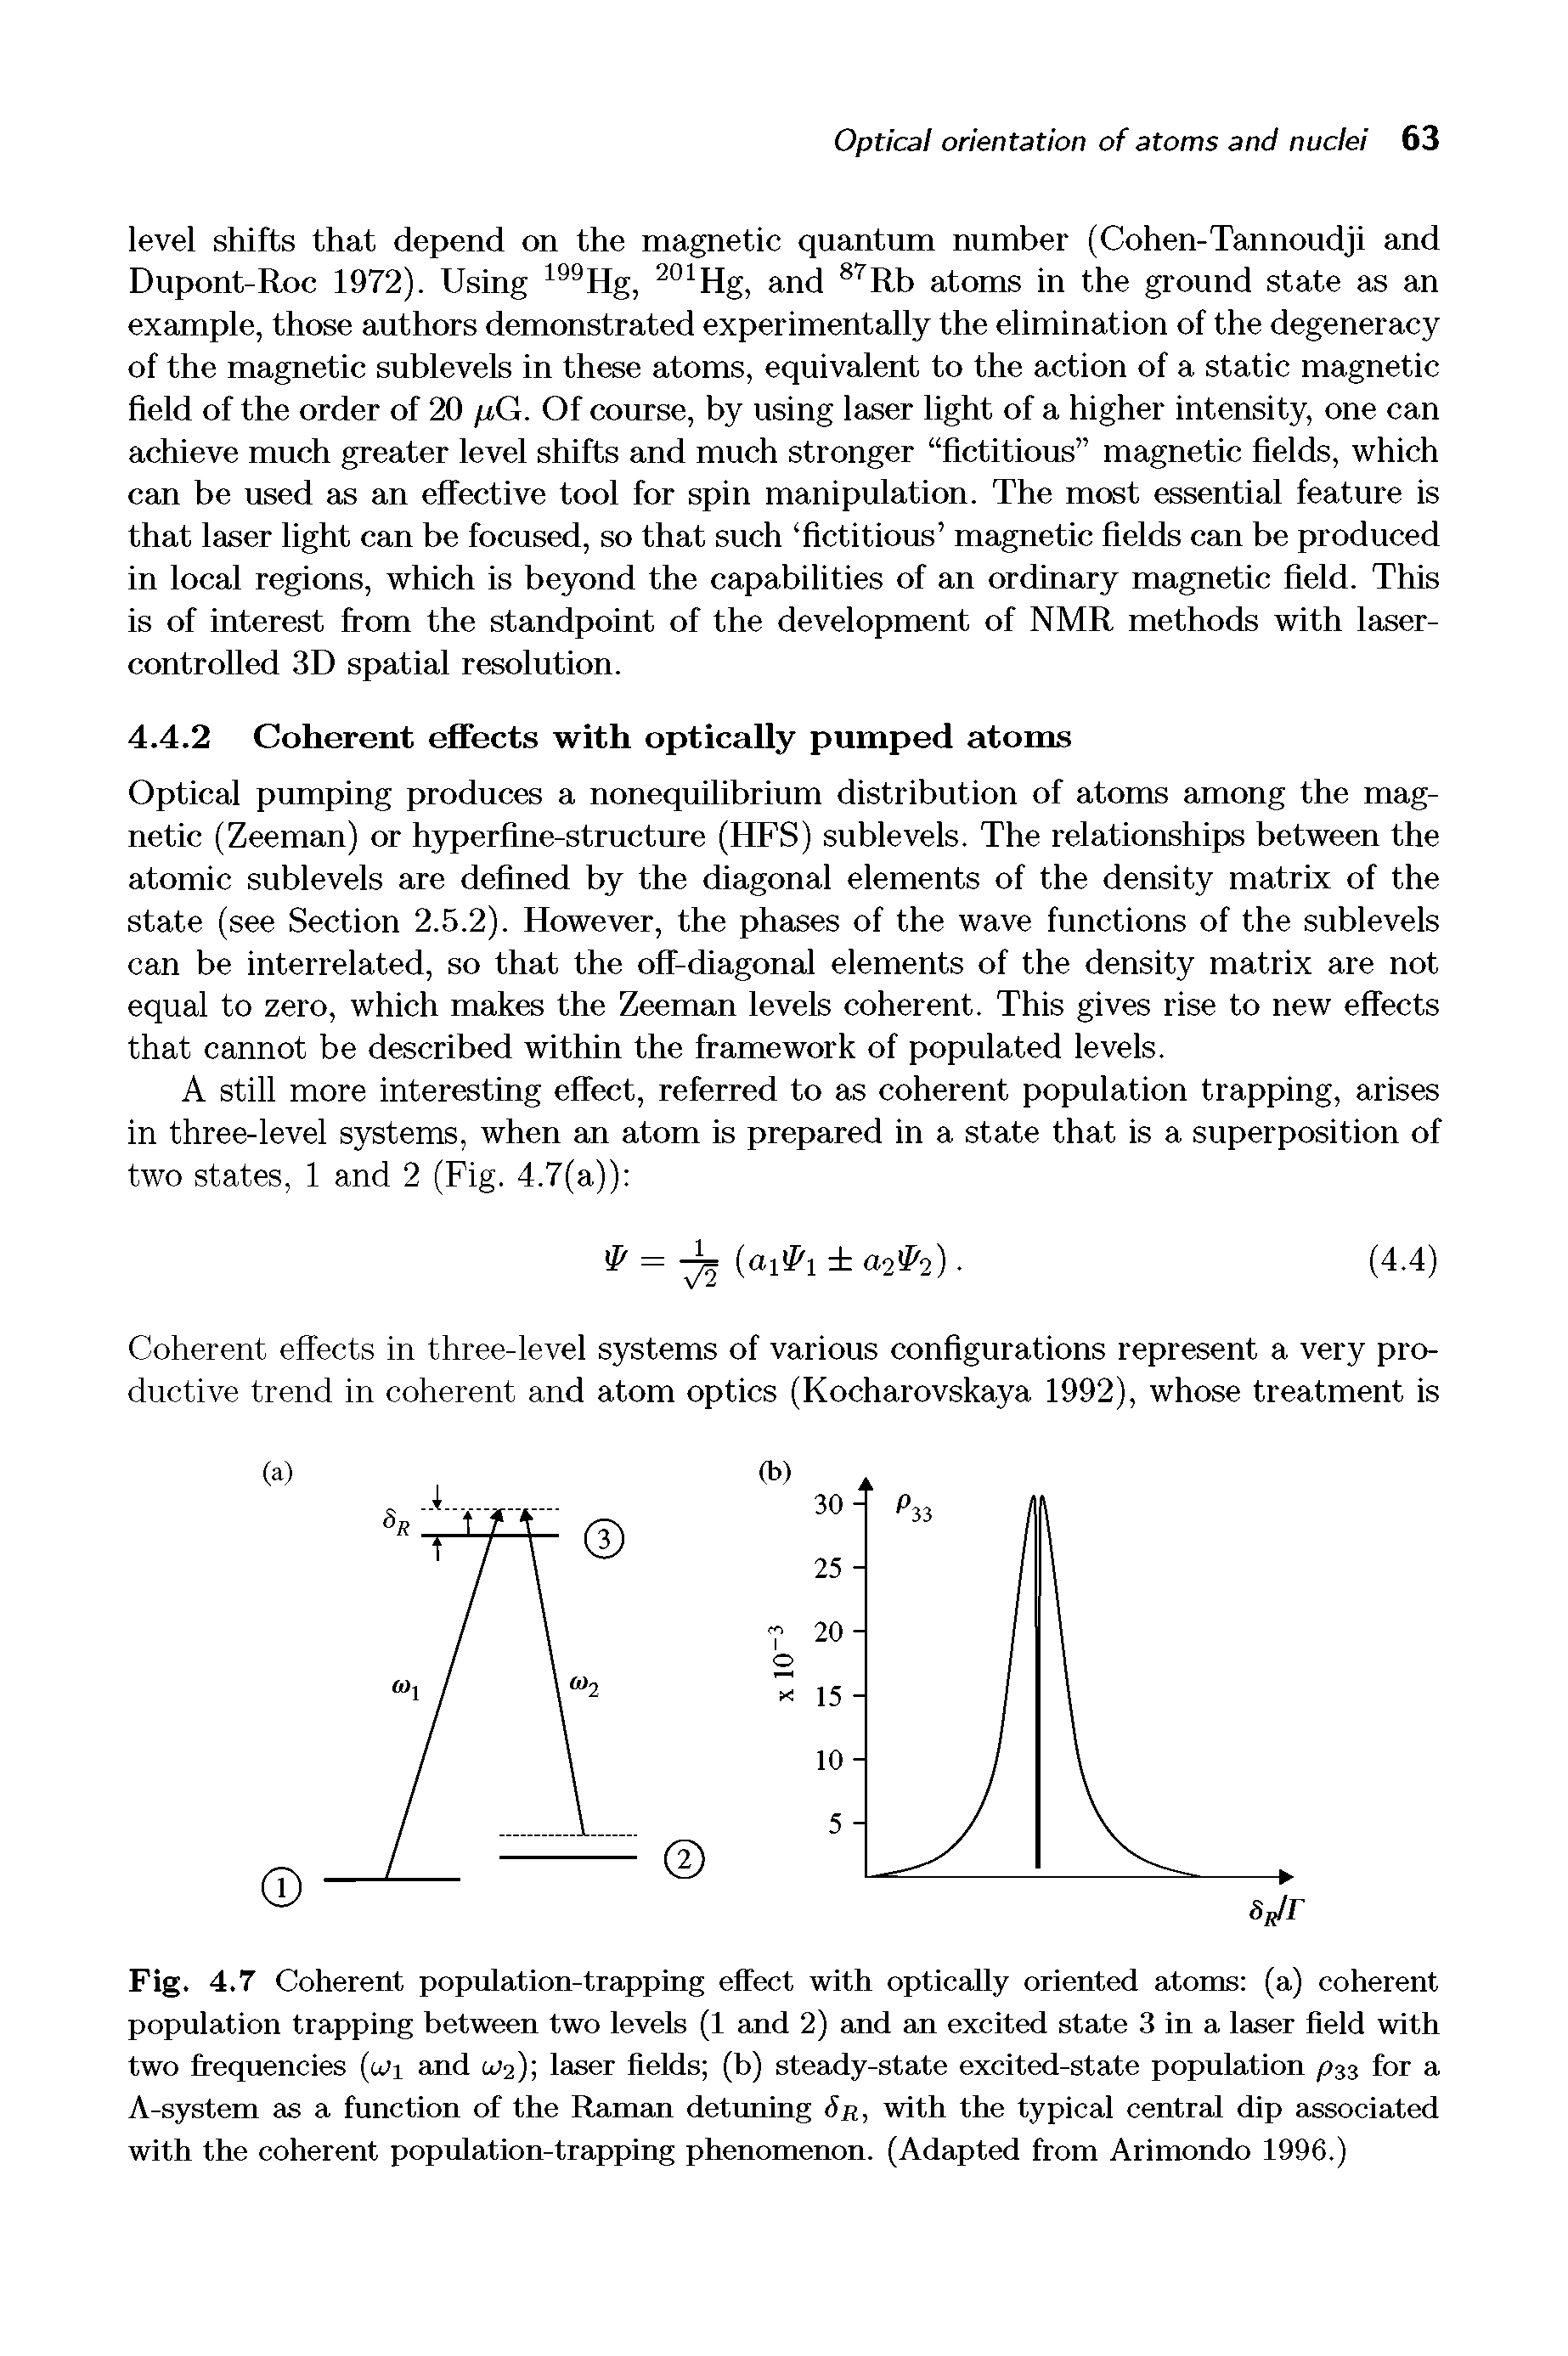 Fig. 4.7 Coherent population-trapping effect with optically oriented atoms (a) coherent population trapping between two levels (1 and 2) and an excited state 3 in a laser field with two frequencies (wi and LJ2), laser fields (b) steady-state excited-state population pss for a A-system as a function of the Raman detrming Sr, with the typical central dip associated with the coherent population-trapping phenomenon. (Adapted from Arimondo 1996.)...